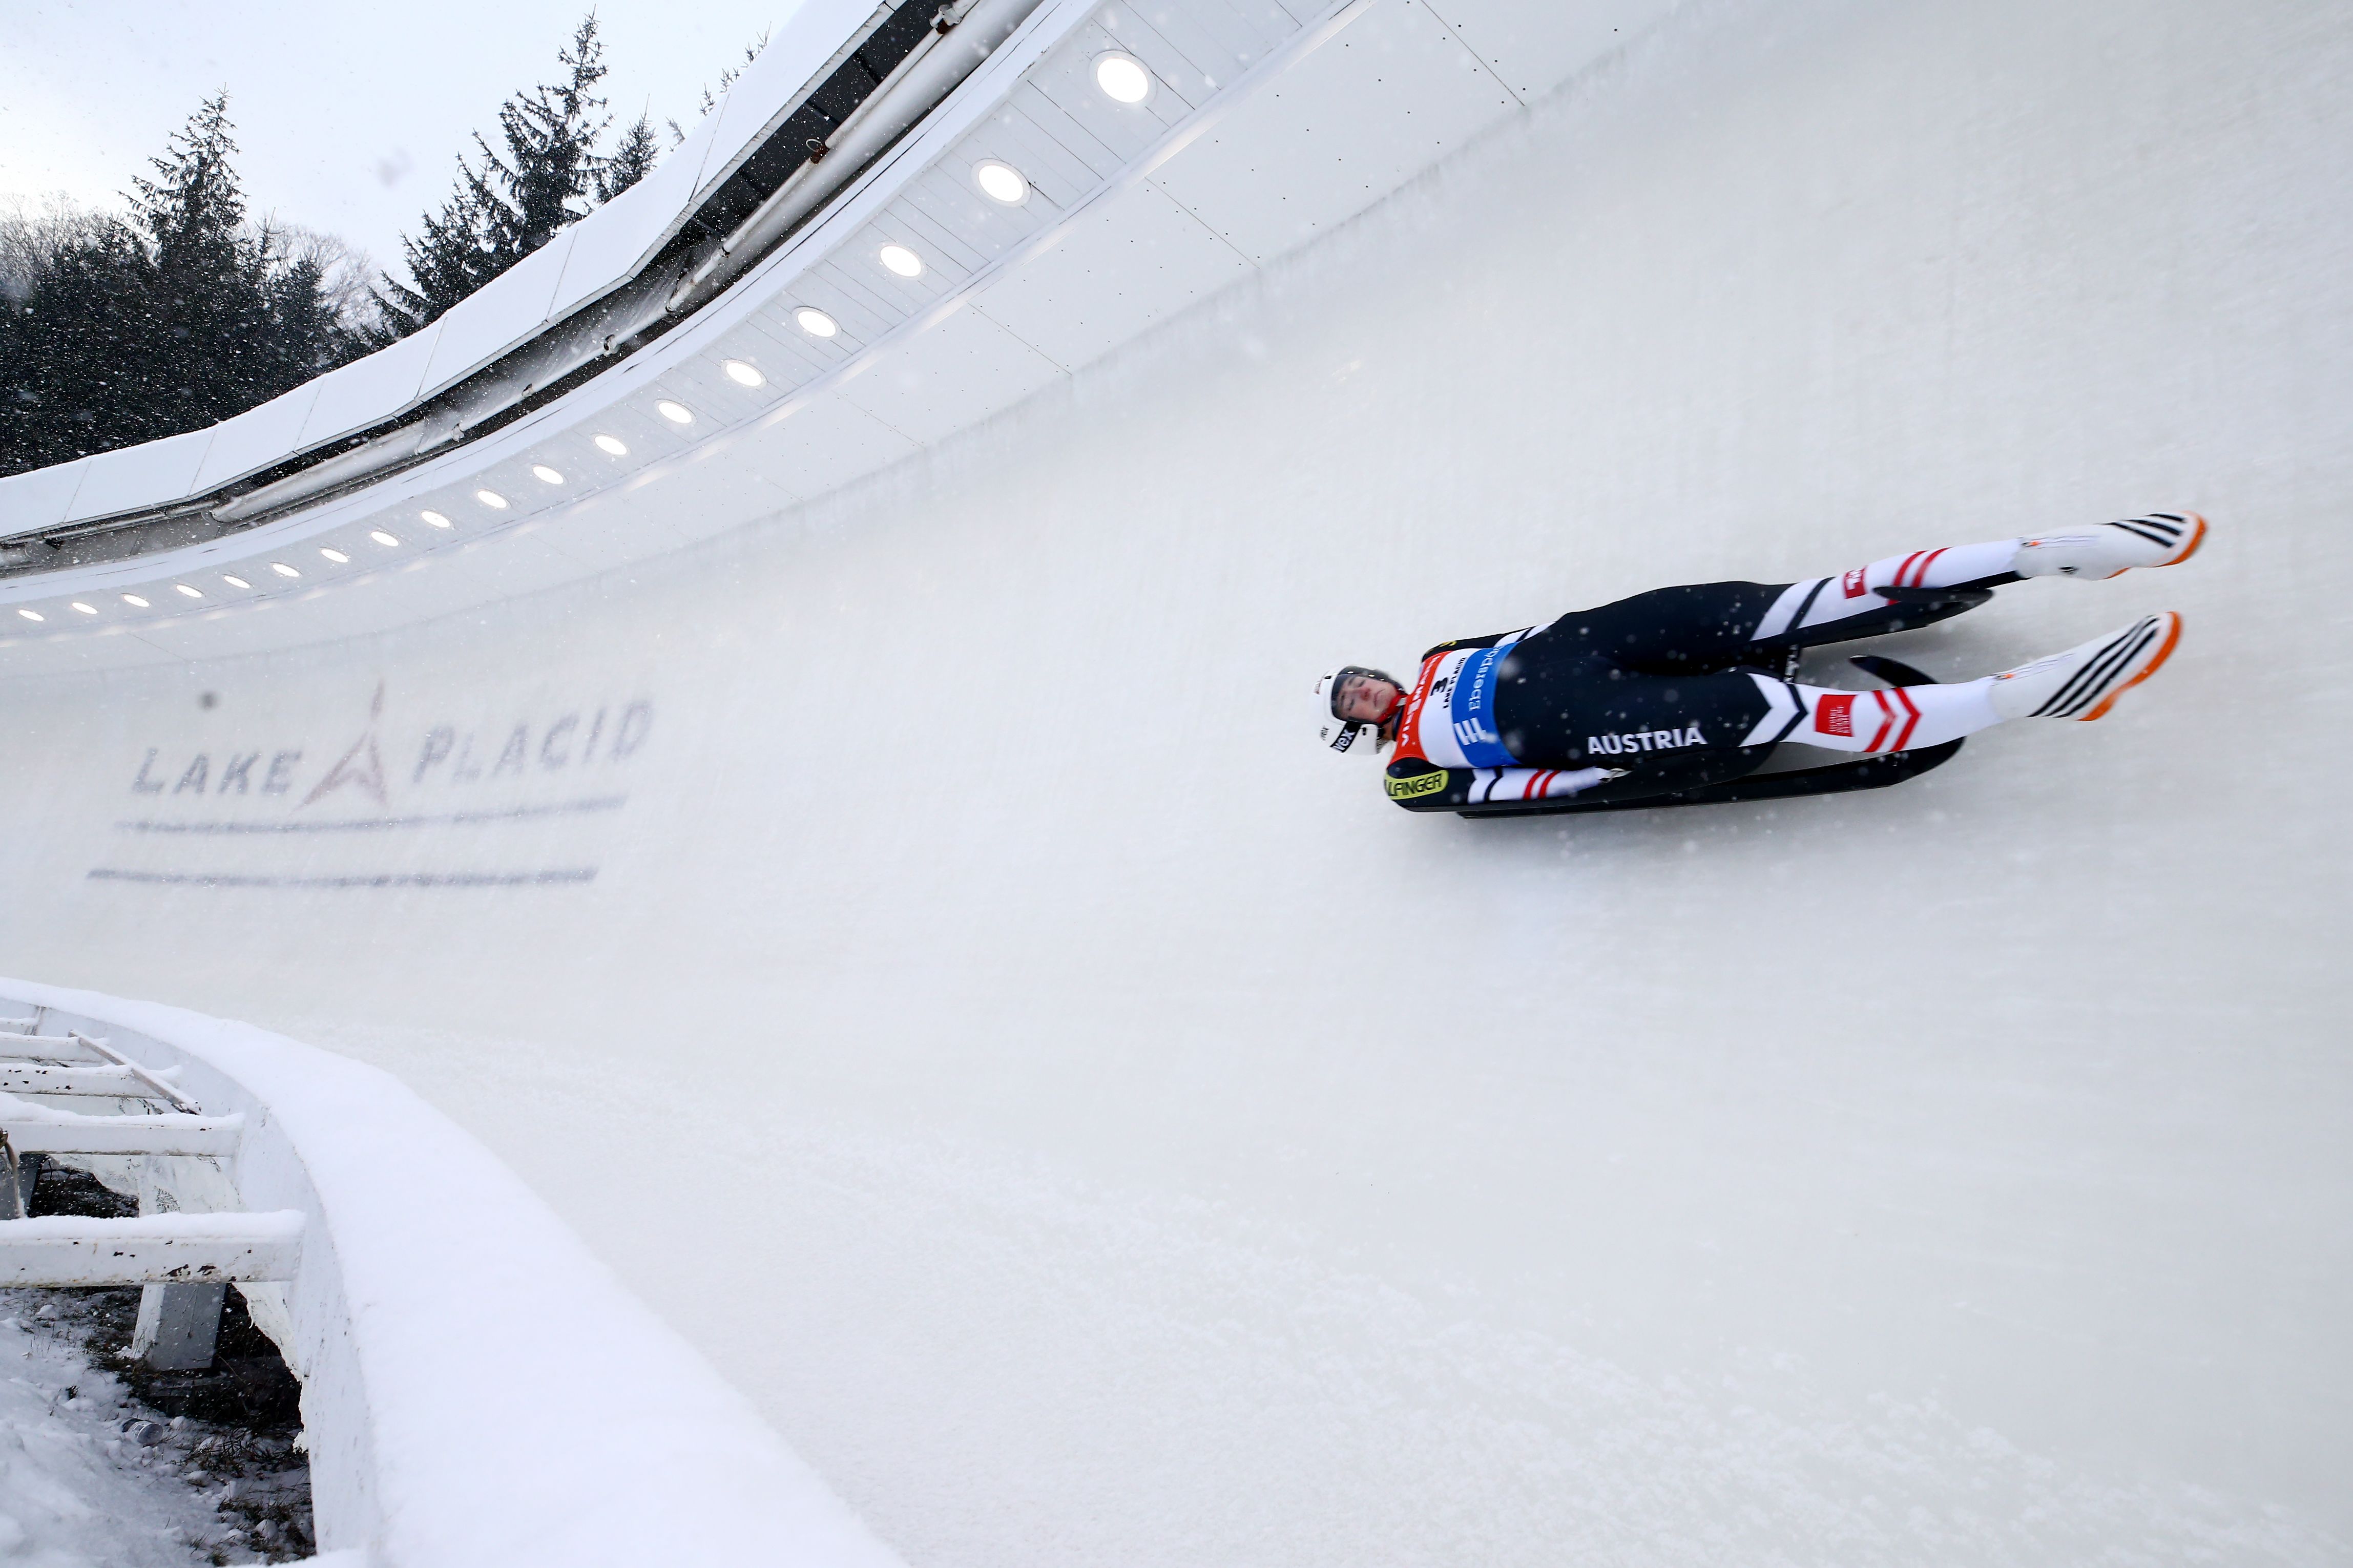 Winter Olympics 2018 full schedule: When is Luge?